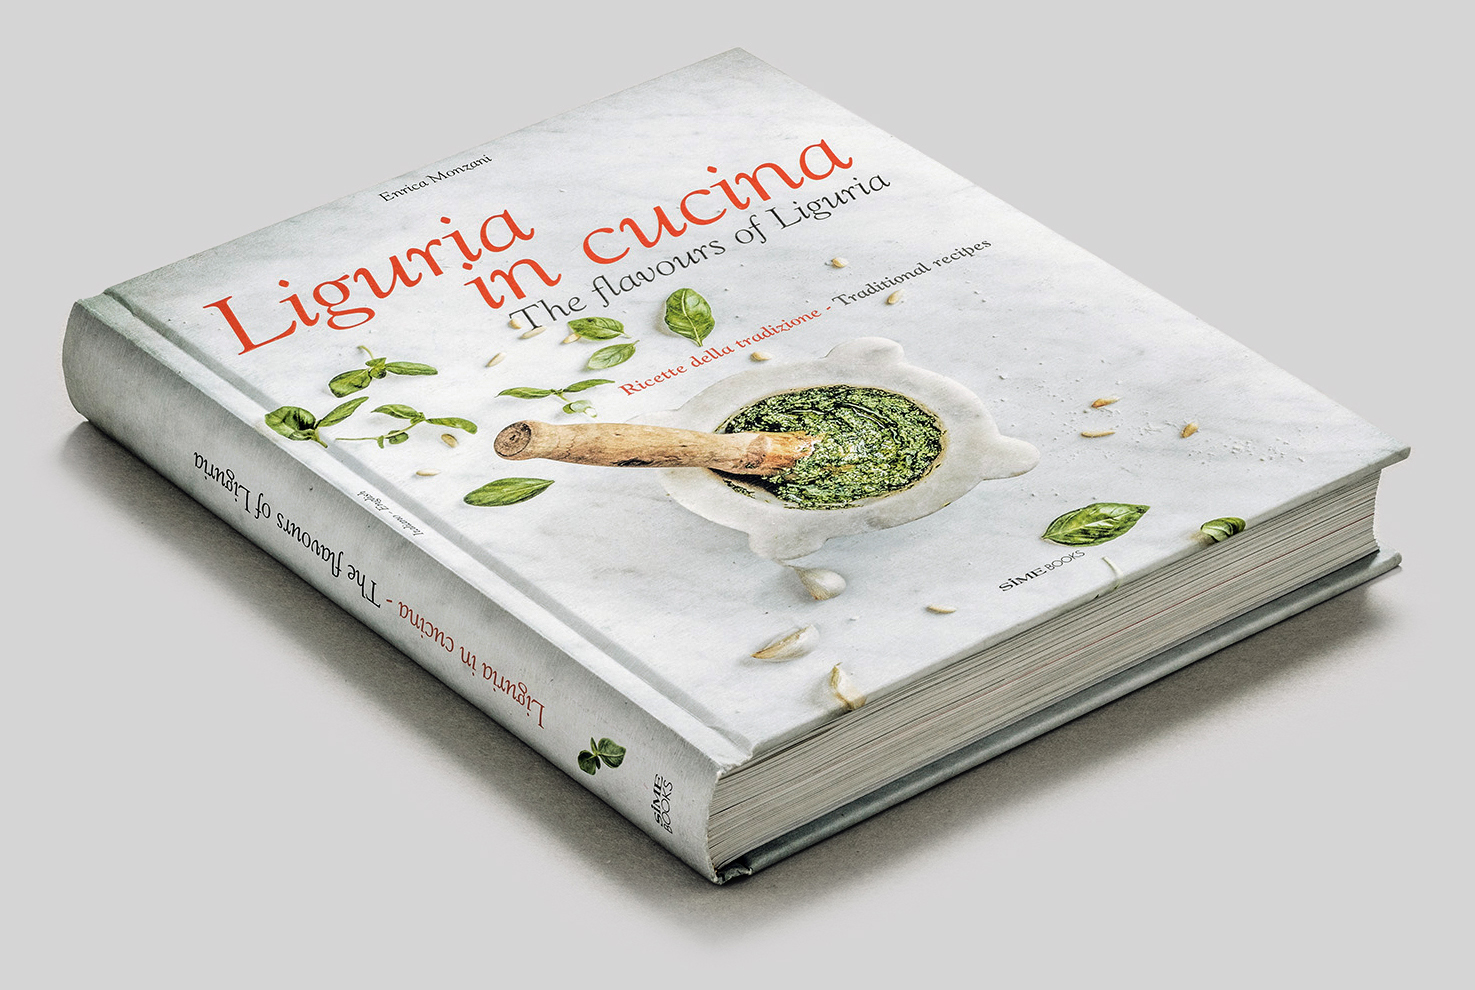 New Images > Liguria in Cucina - The flavours of Liguria Traditional recipes